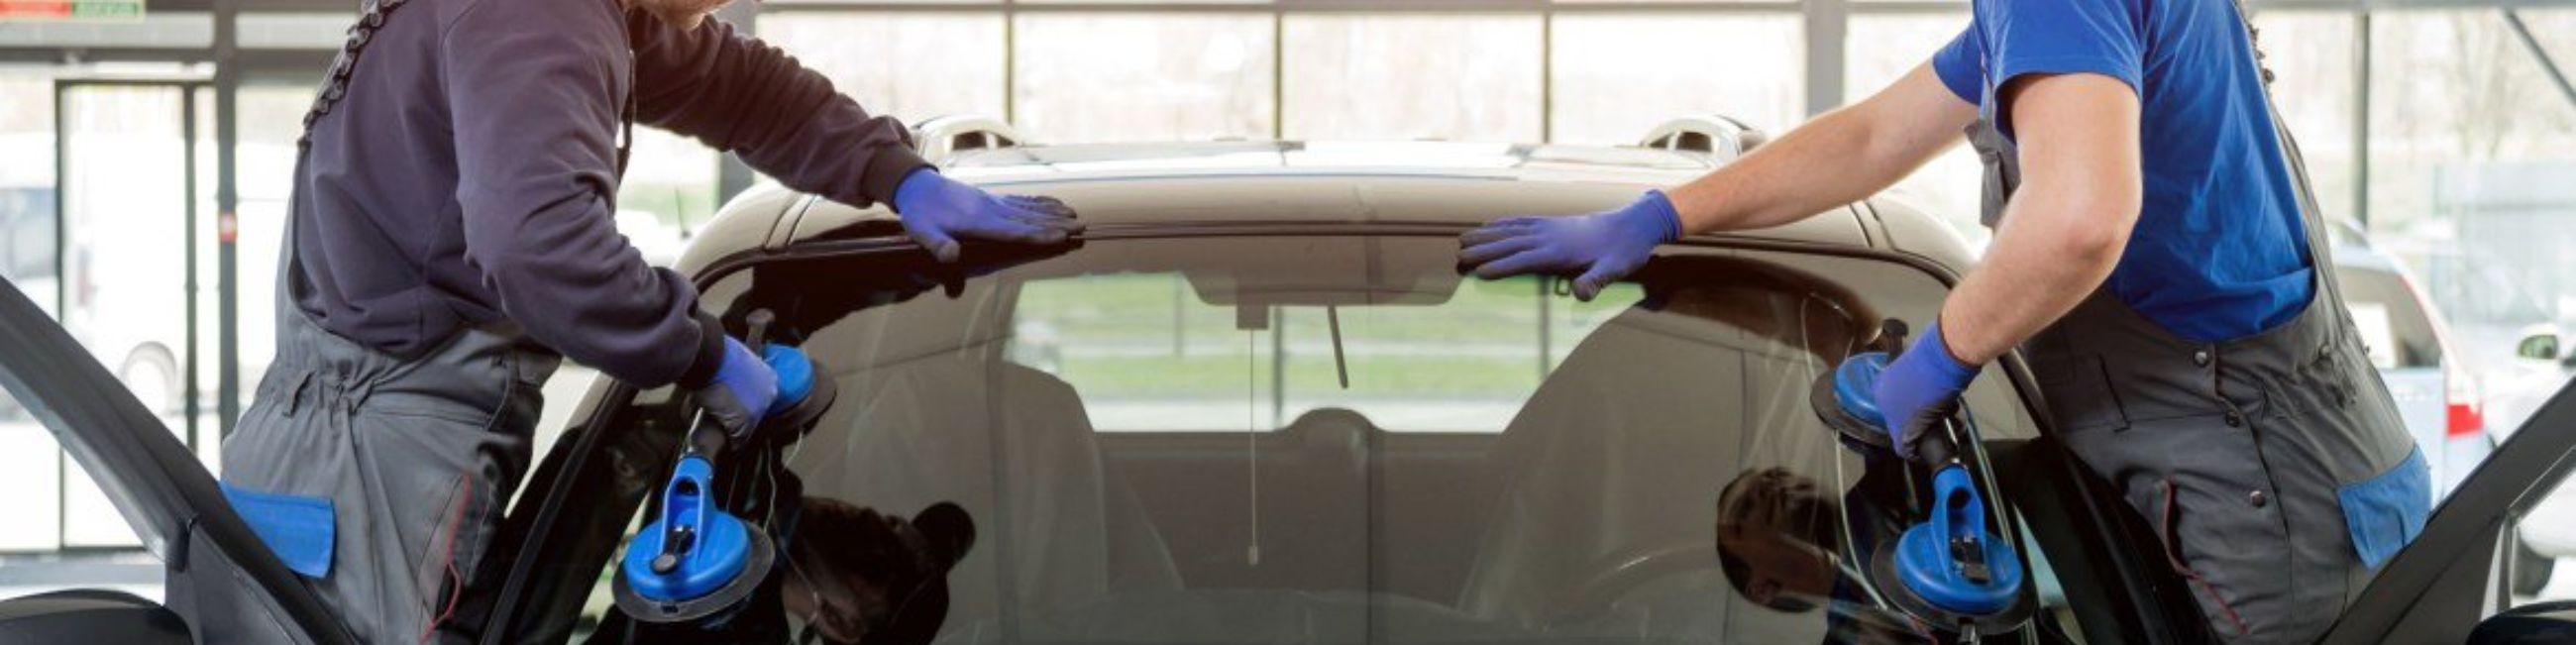 correction of car windows, vehicles of a specific type, tractors, trucks, Passenger cars, side glasses, rear glasses, sale of glasses, glass stallion repair, installation of car windows